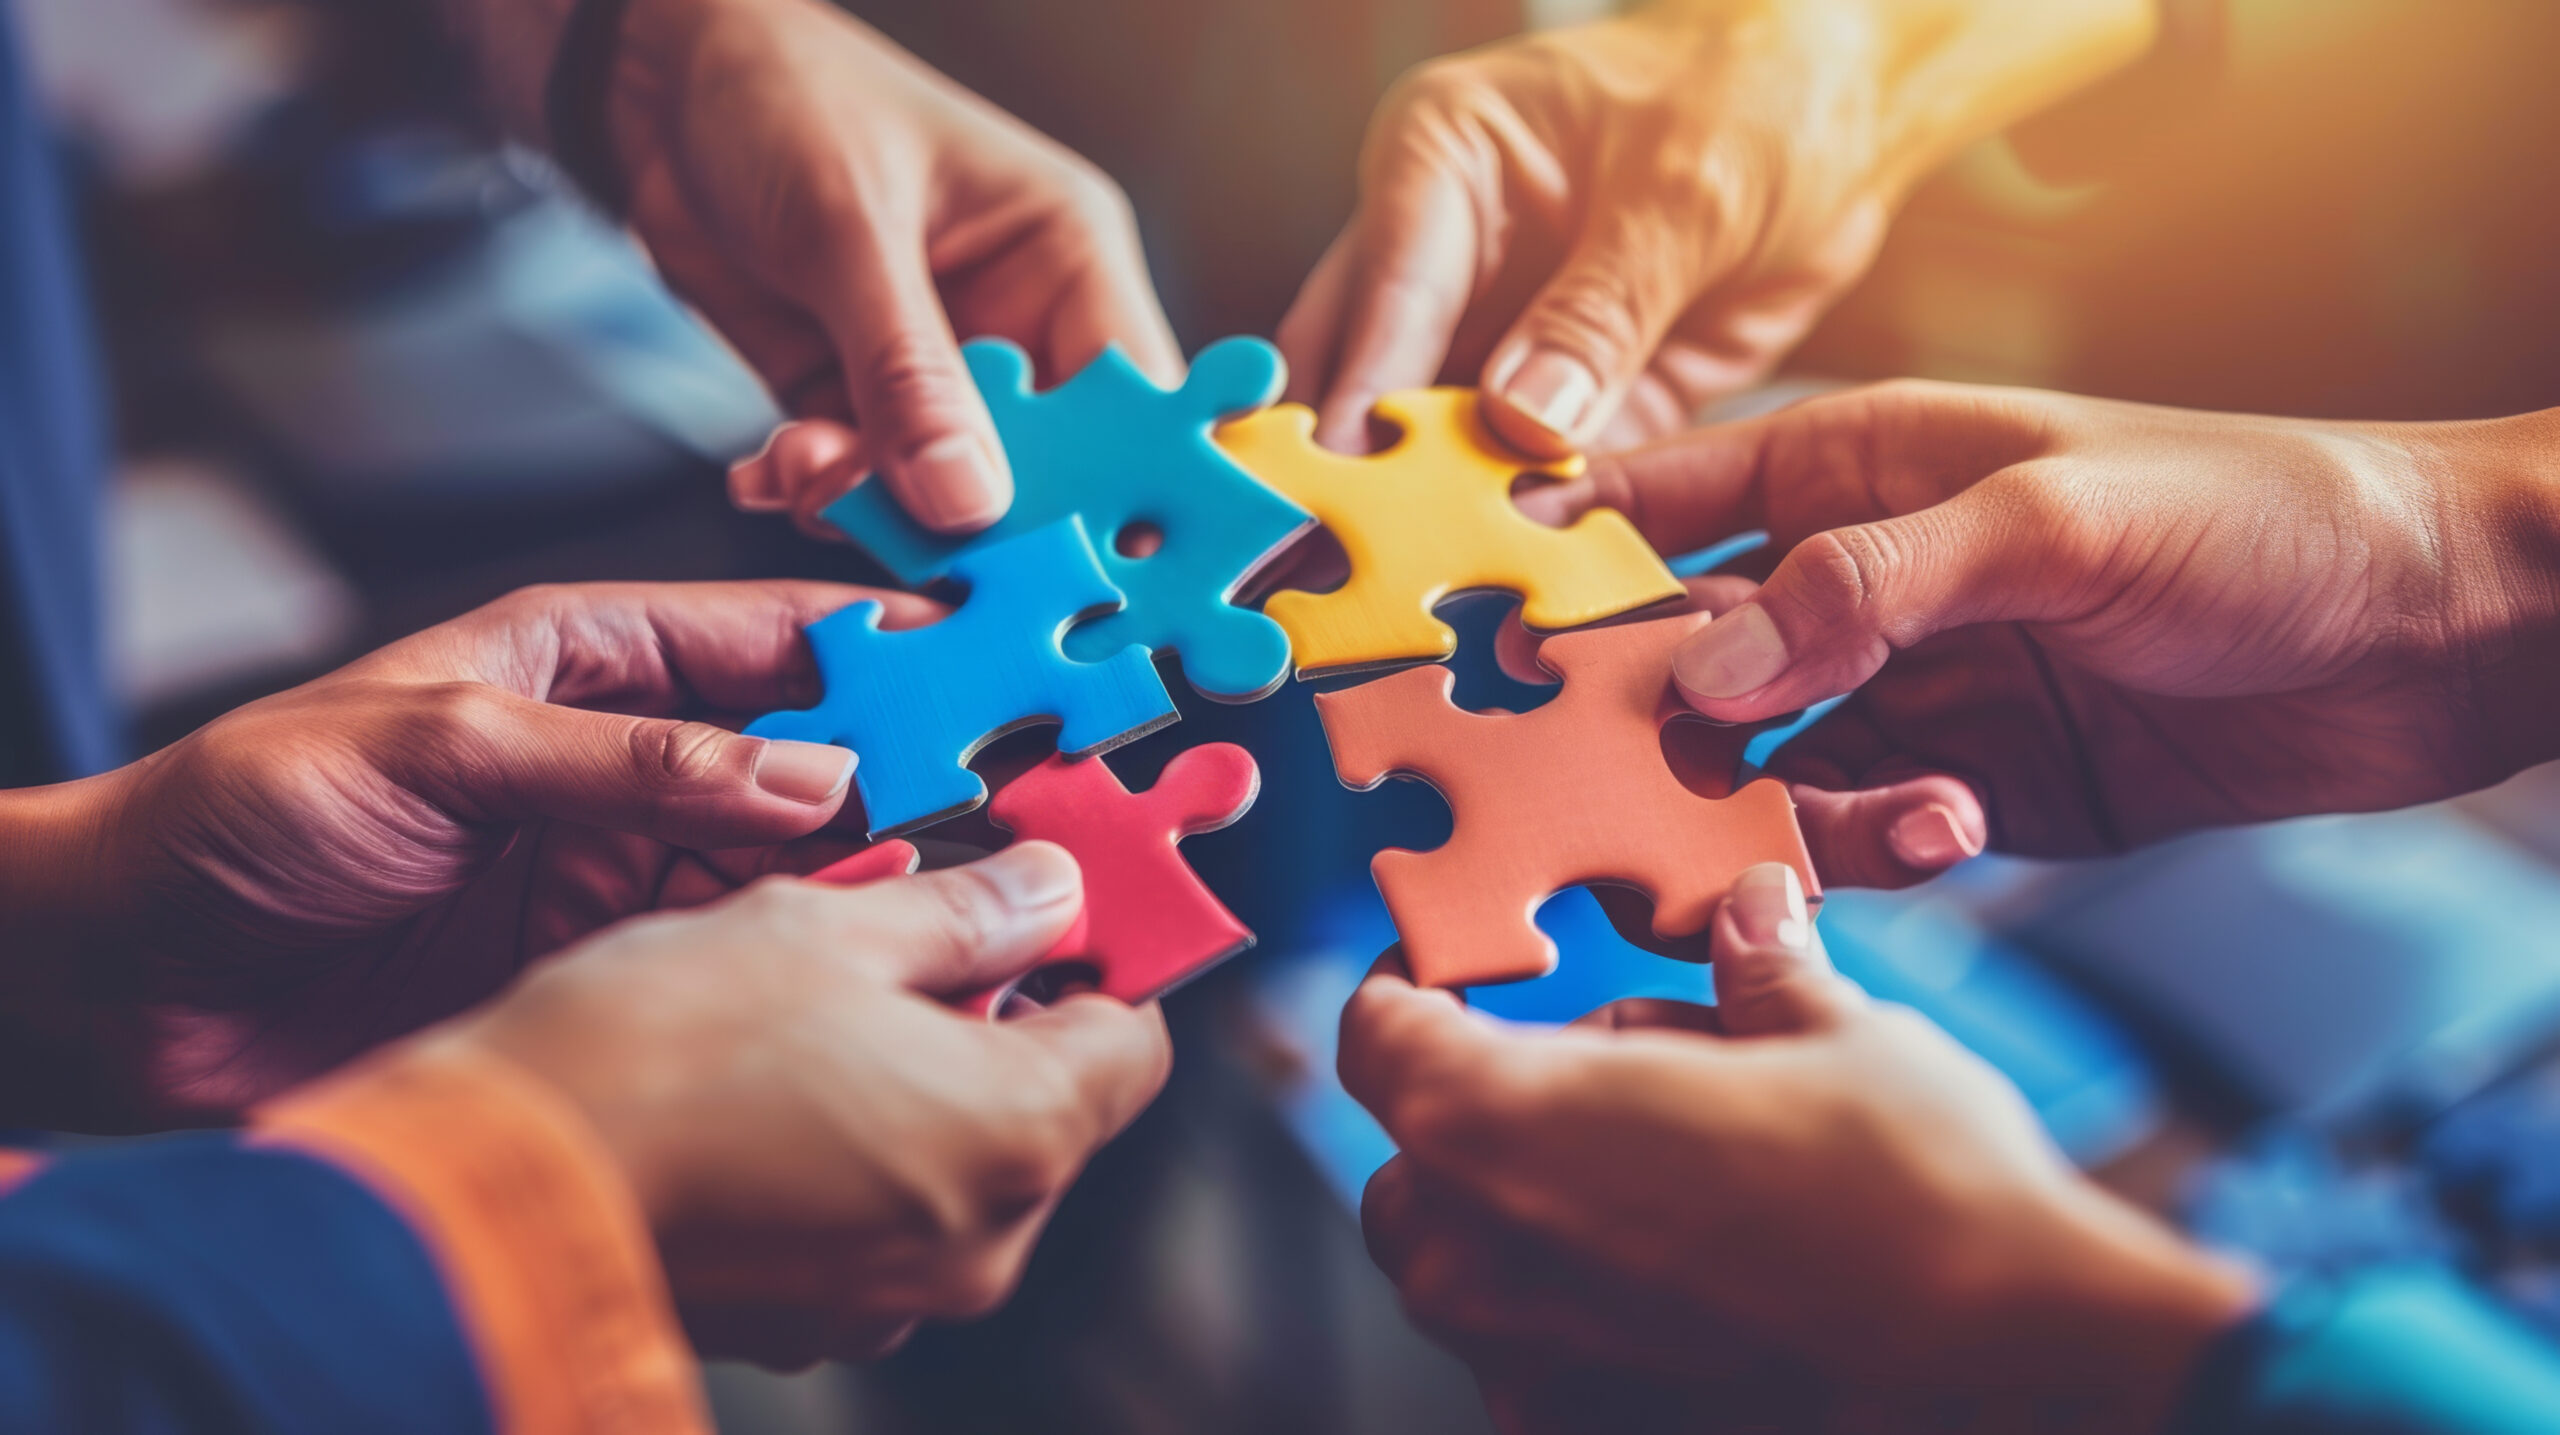 multiple hands of diverse people are connecting colorful puzzle pieces together.